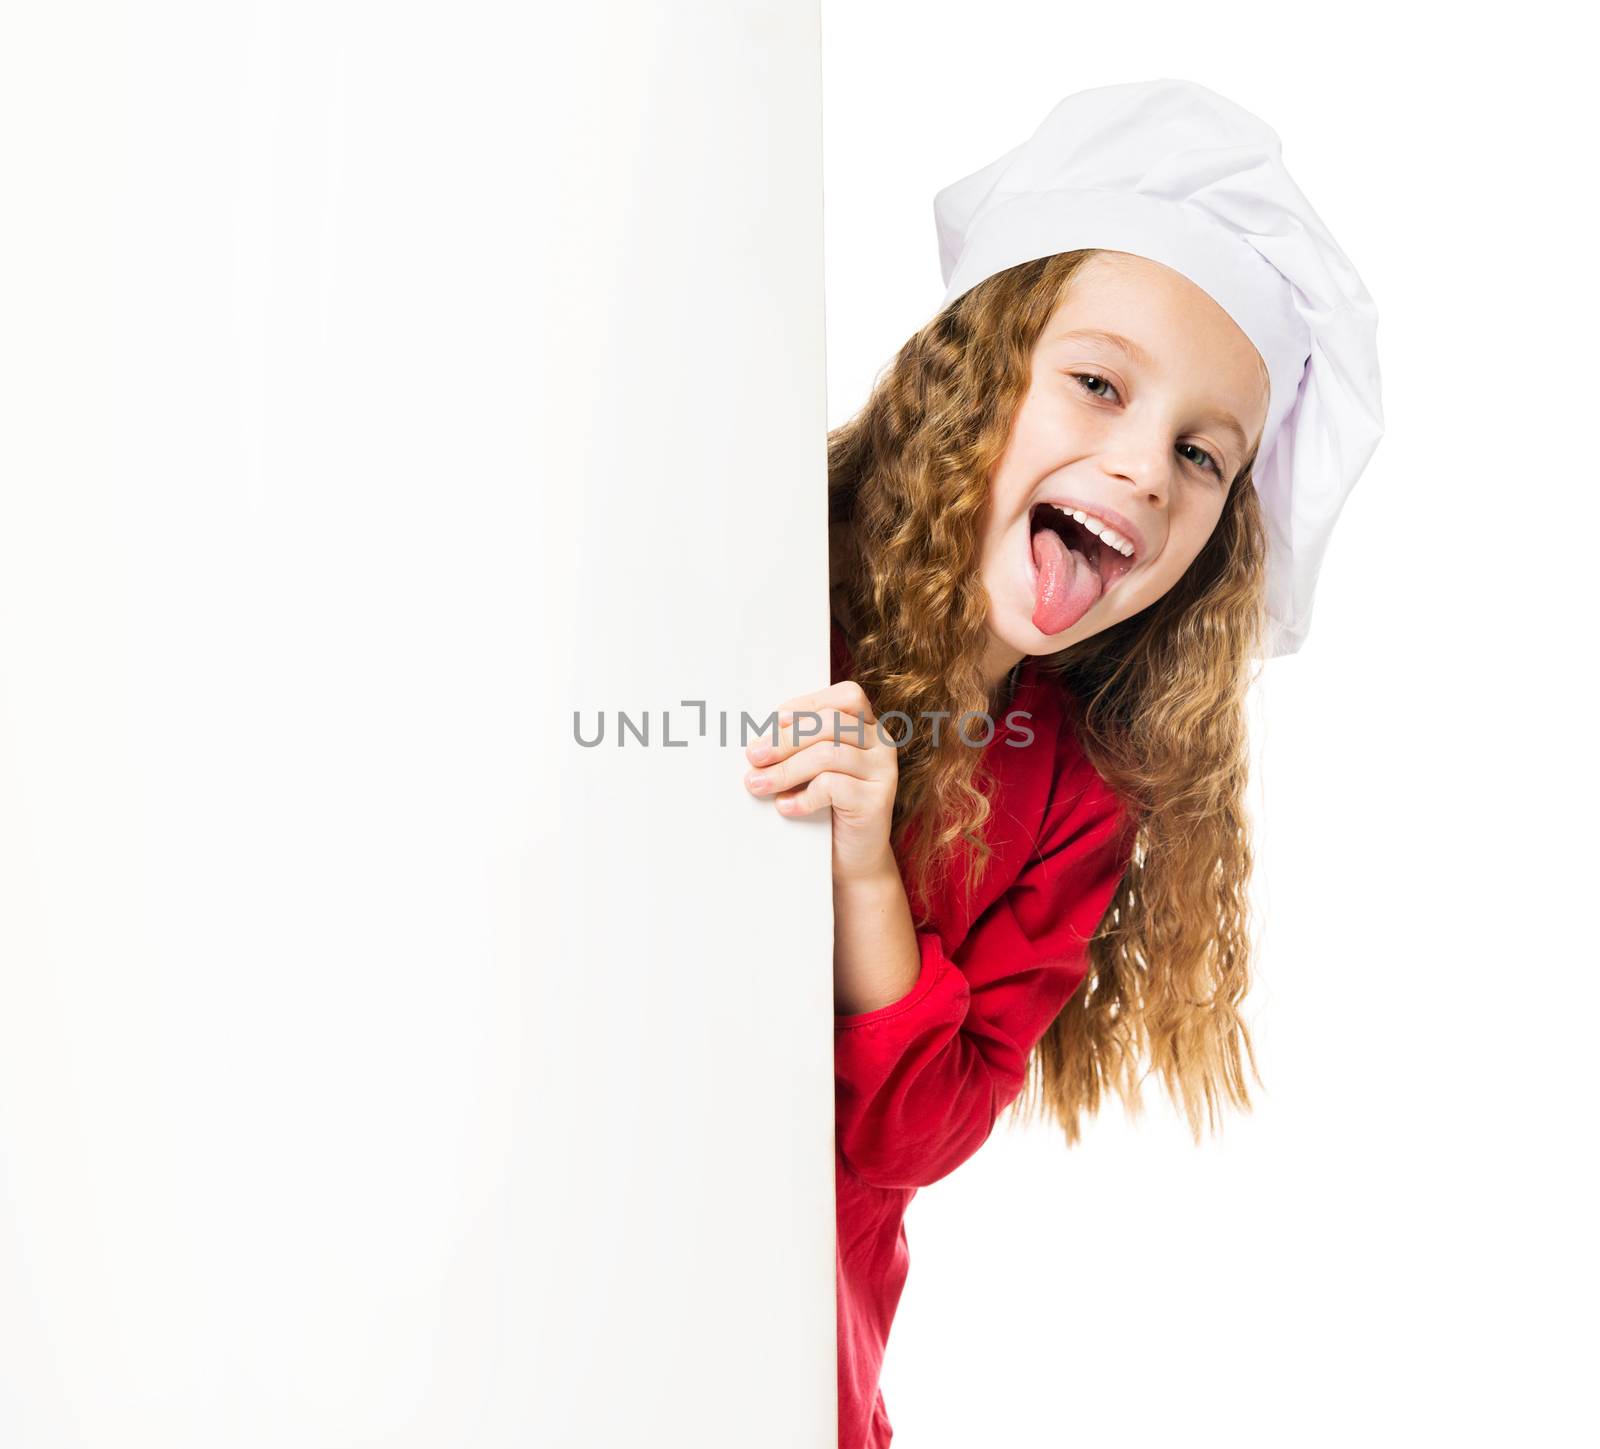 little girl in chef hat with a white board shows tongue